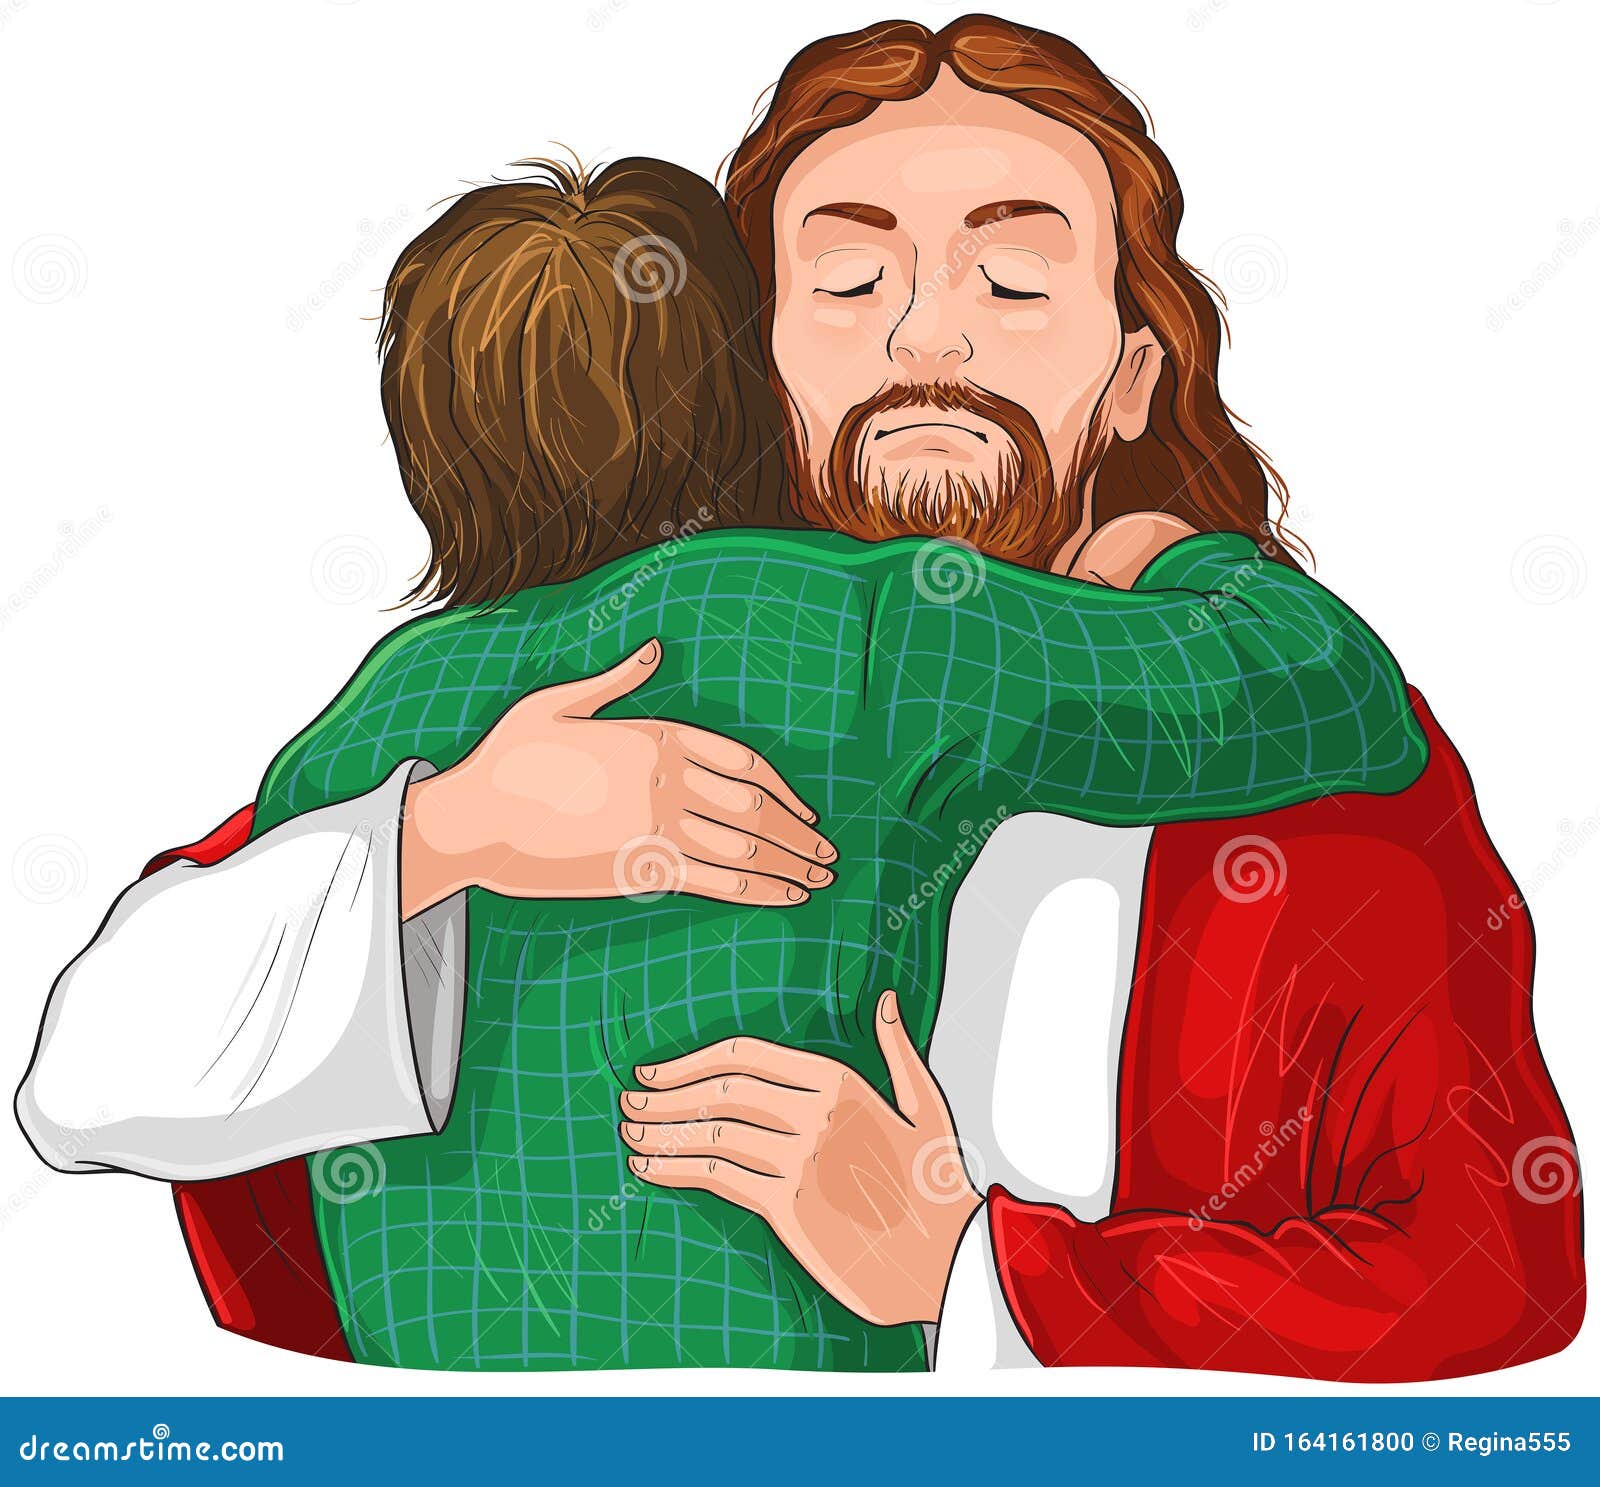 jesus hugging child image.  cartoon christian   on white. also available black and white version